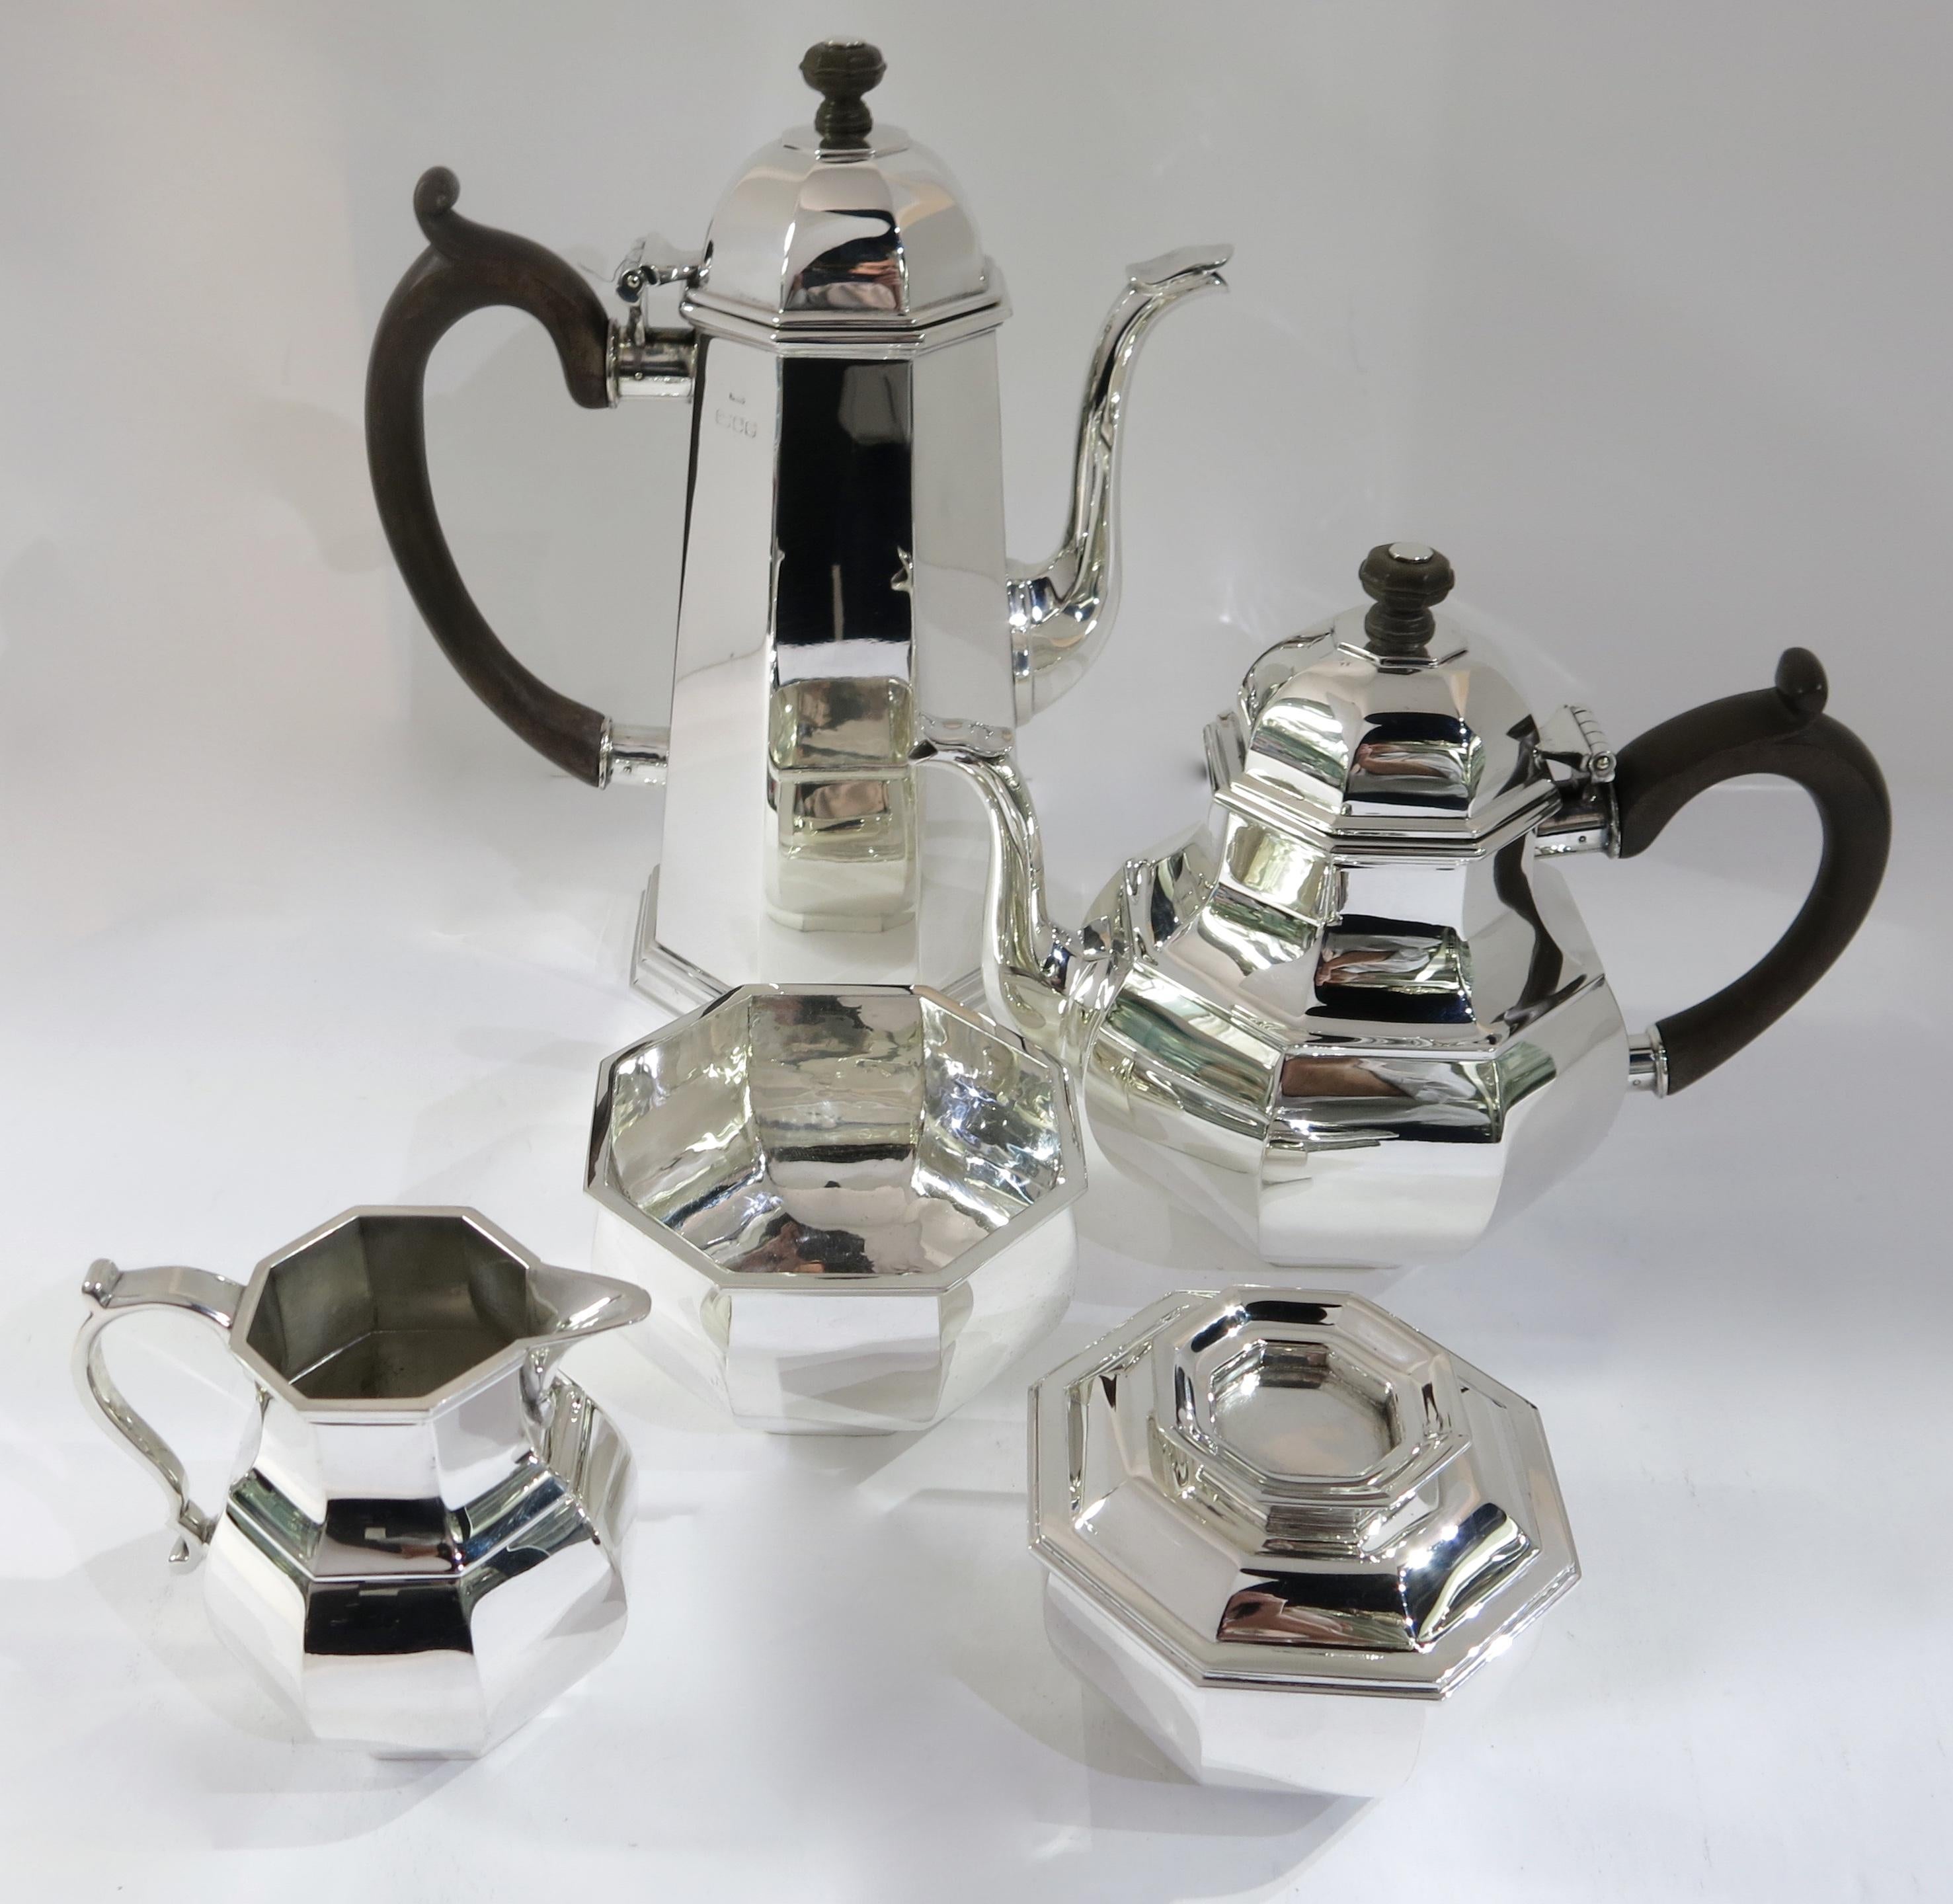 Sterling silver 5 pieces, octagonal hand forged tea and coffee set, custom made in England by Tiffany & Co. Made in London, dated 1982.
Each piece is fully hallmarked.
Set weighs 2, 750 grams. The coffee pot stands 10